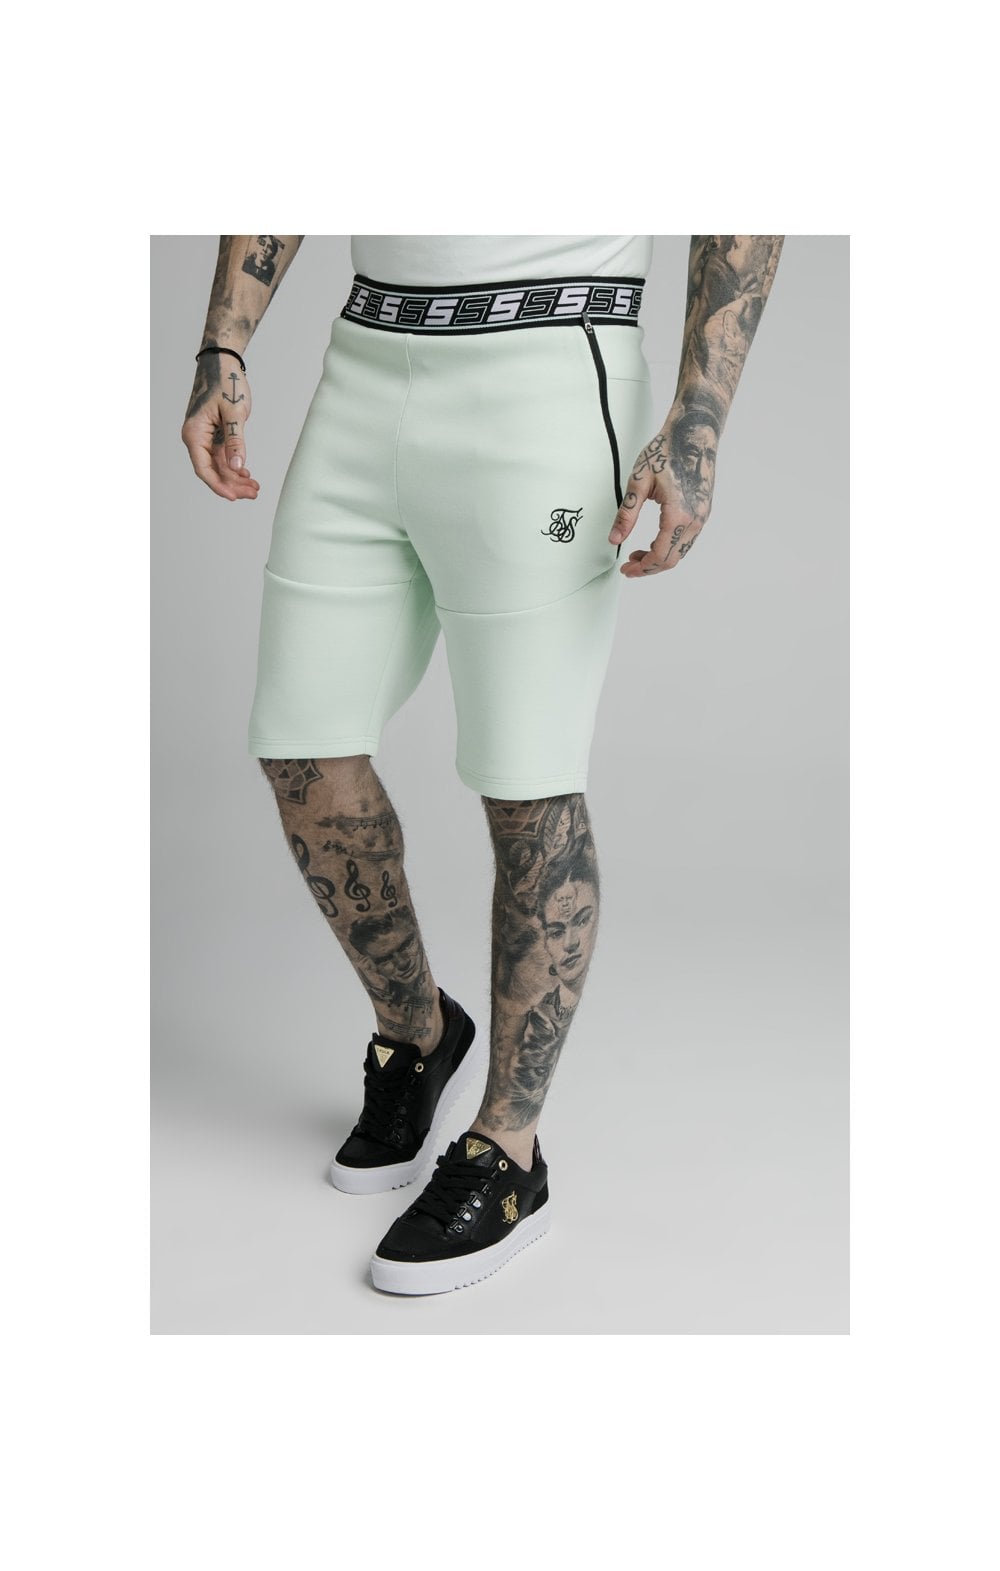 Load image into Gallery viewer, SikSilk Exhibit Function Shorts - Aqua Teal